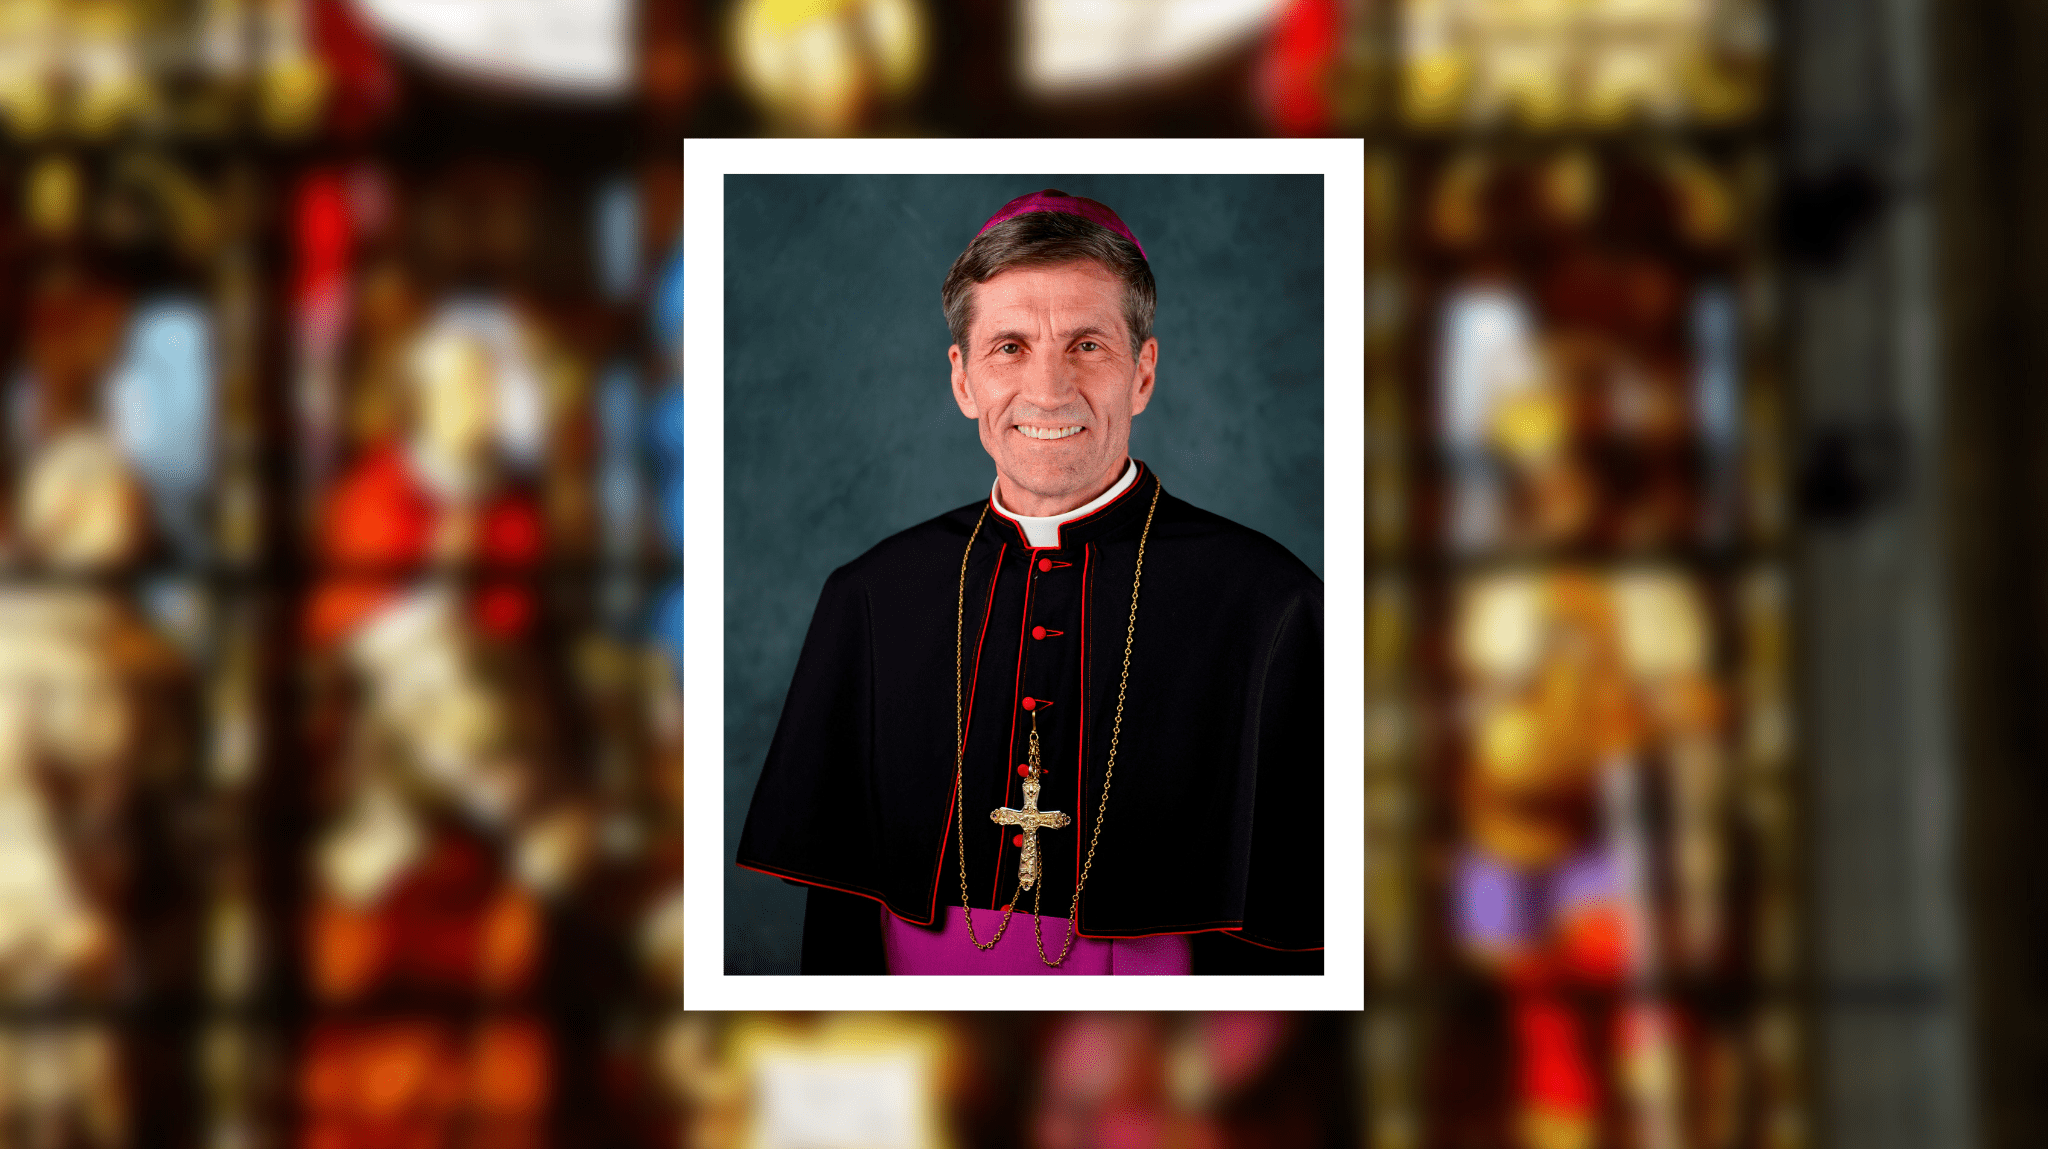 Featured image for “New Catholic bishop to visit four Delaware parishes at Christmas”